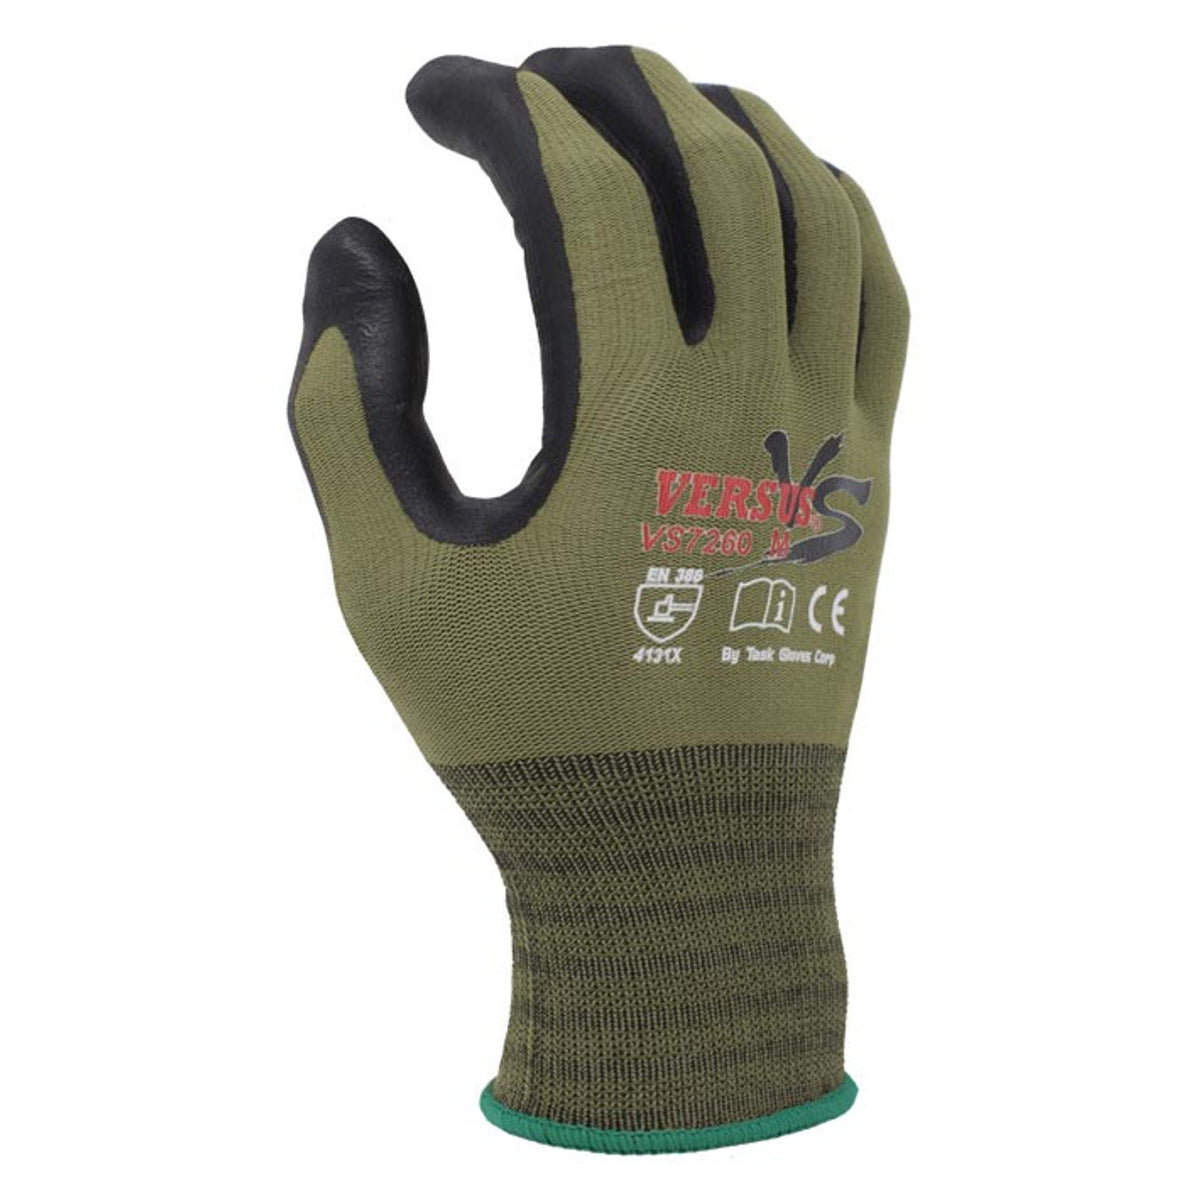 TASK gloves VERSUS 15G Nitrile Palm Coated Three Finger Touch Screen